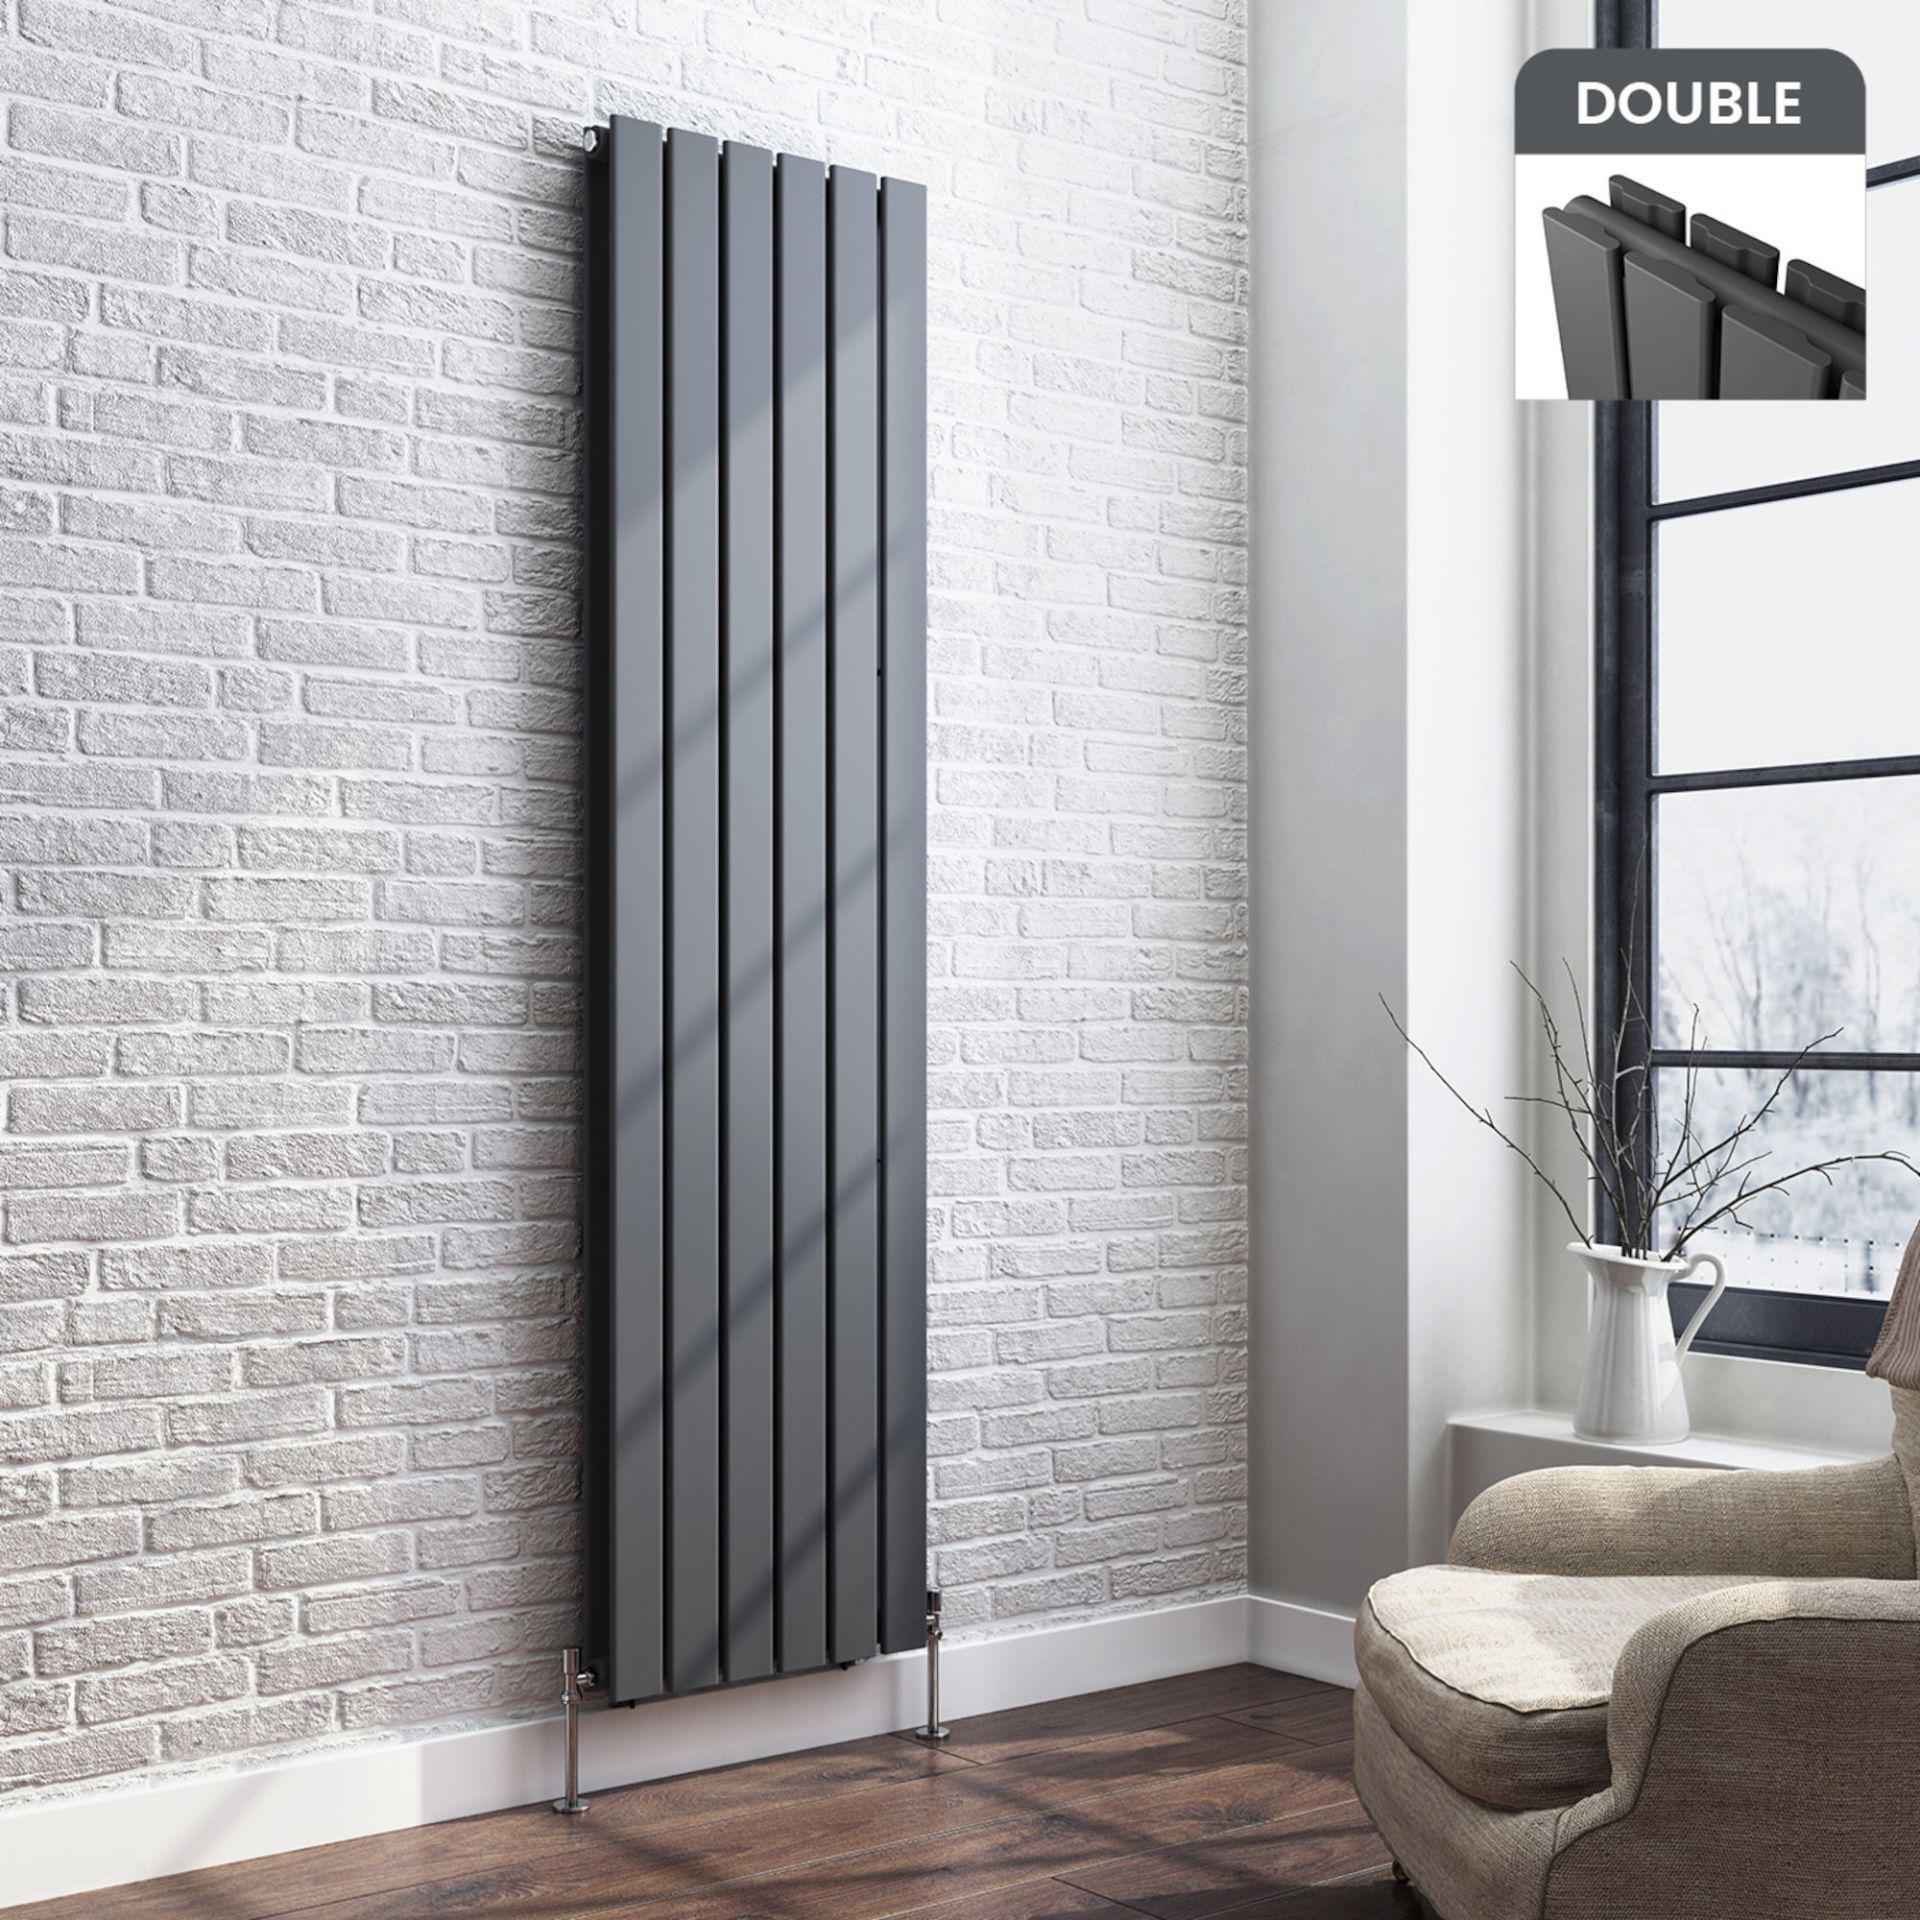 (CT273) 1800x458mm Anthracite Double Flat Panel Vertical Radiator. RRP £499.99. Made with low carbon